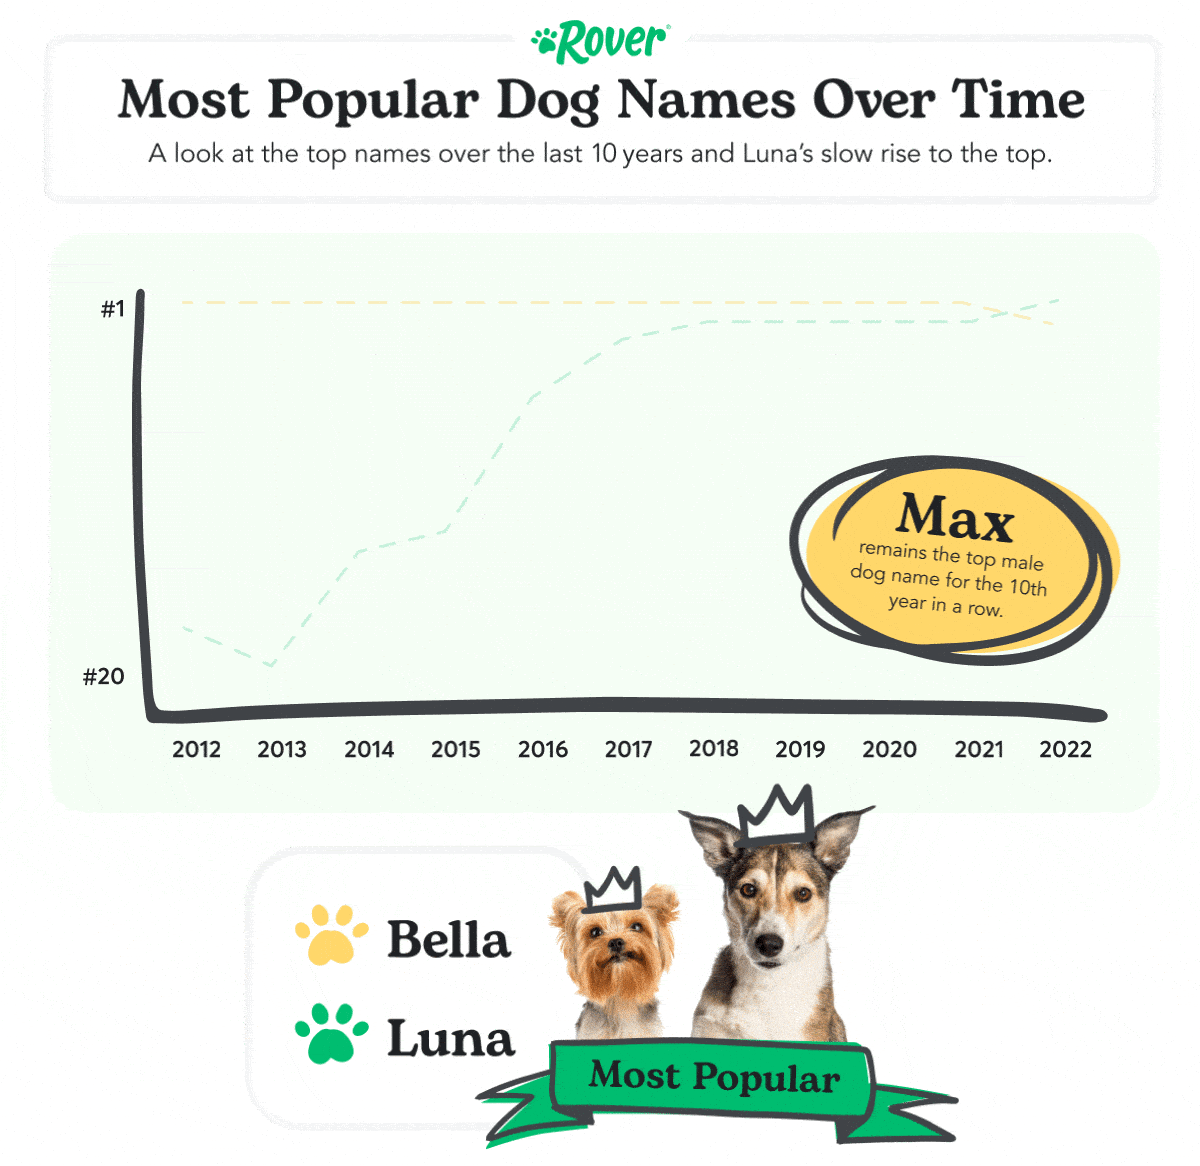 Most Popular Dog Names Over Time: A look at the top names over the last 10 years and Luna's rise to the top. Max Remains the top male dog name for the 10th year in a row. Most popular: Bella, Luna